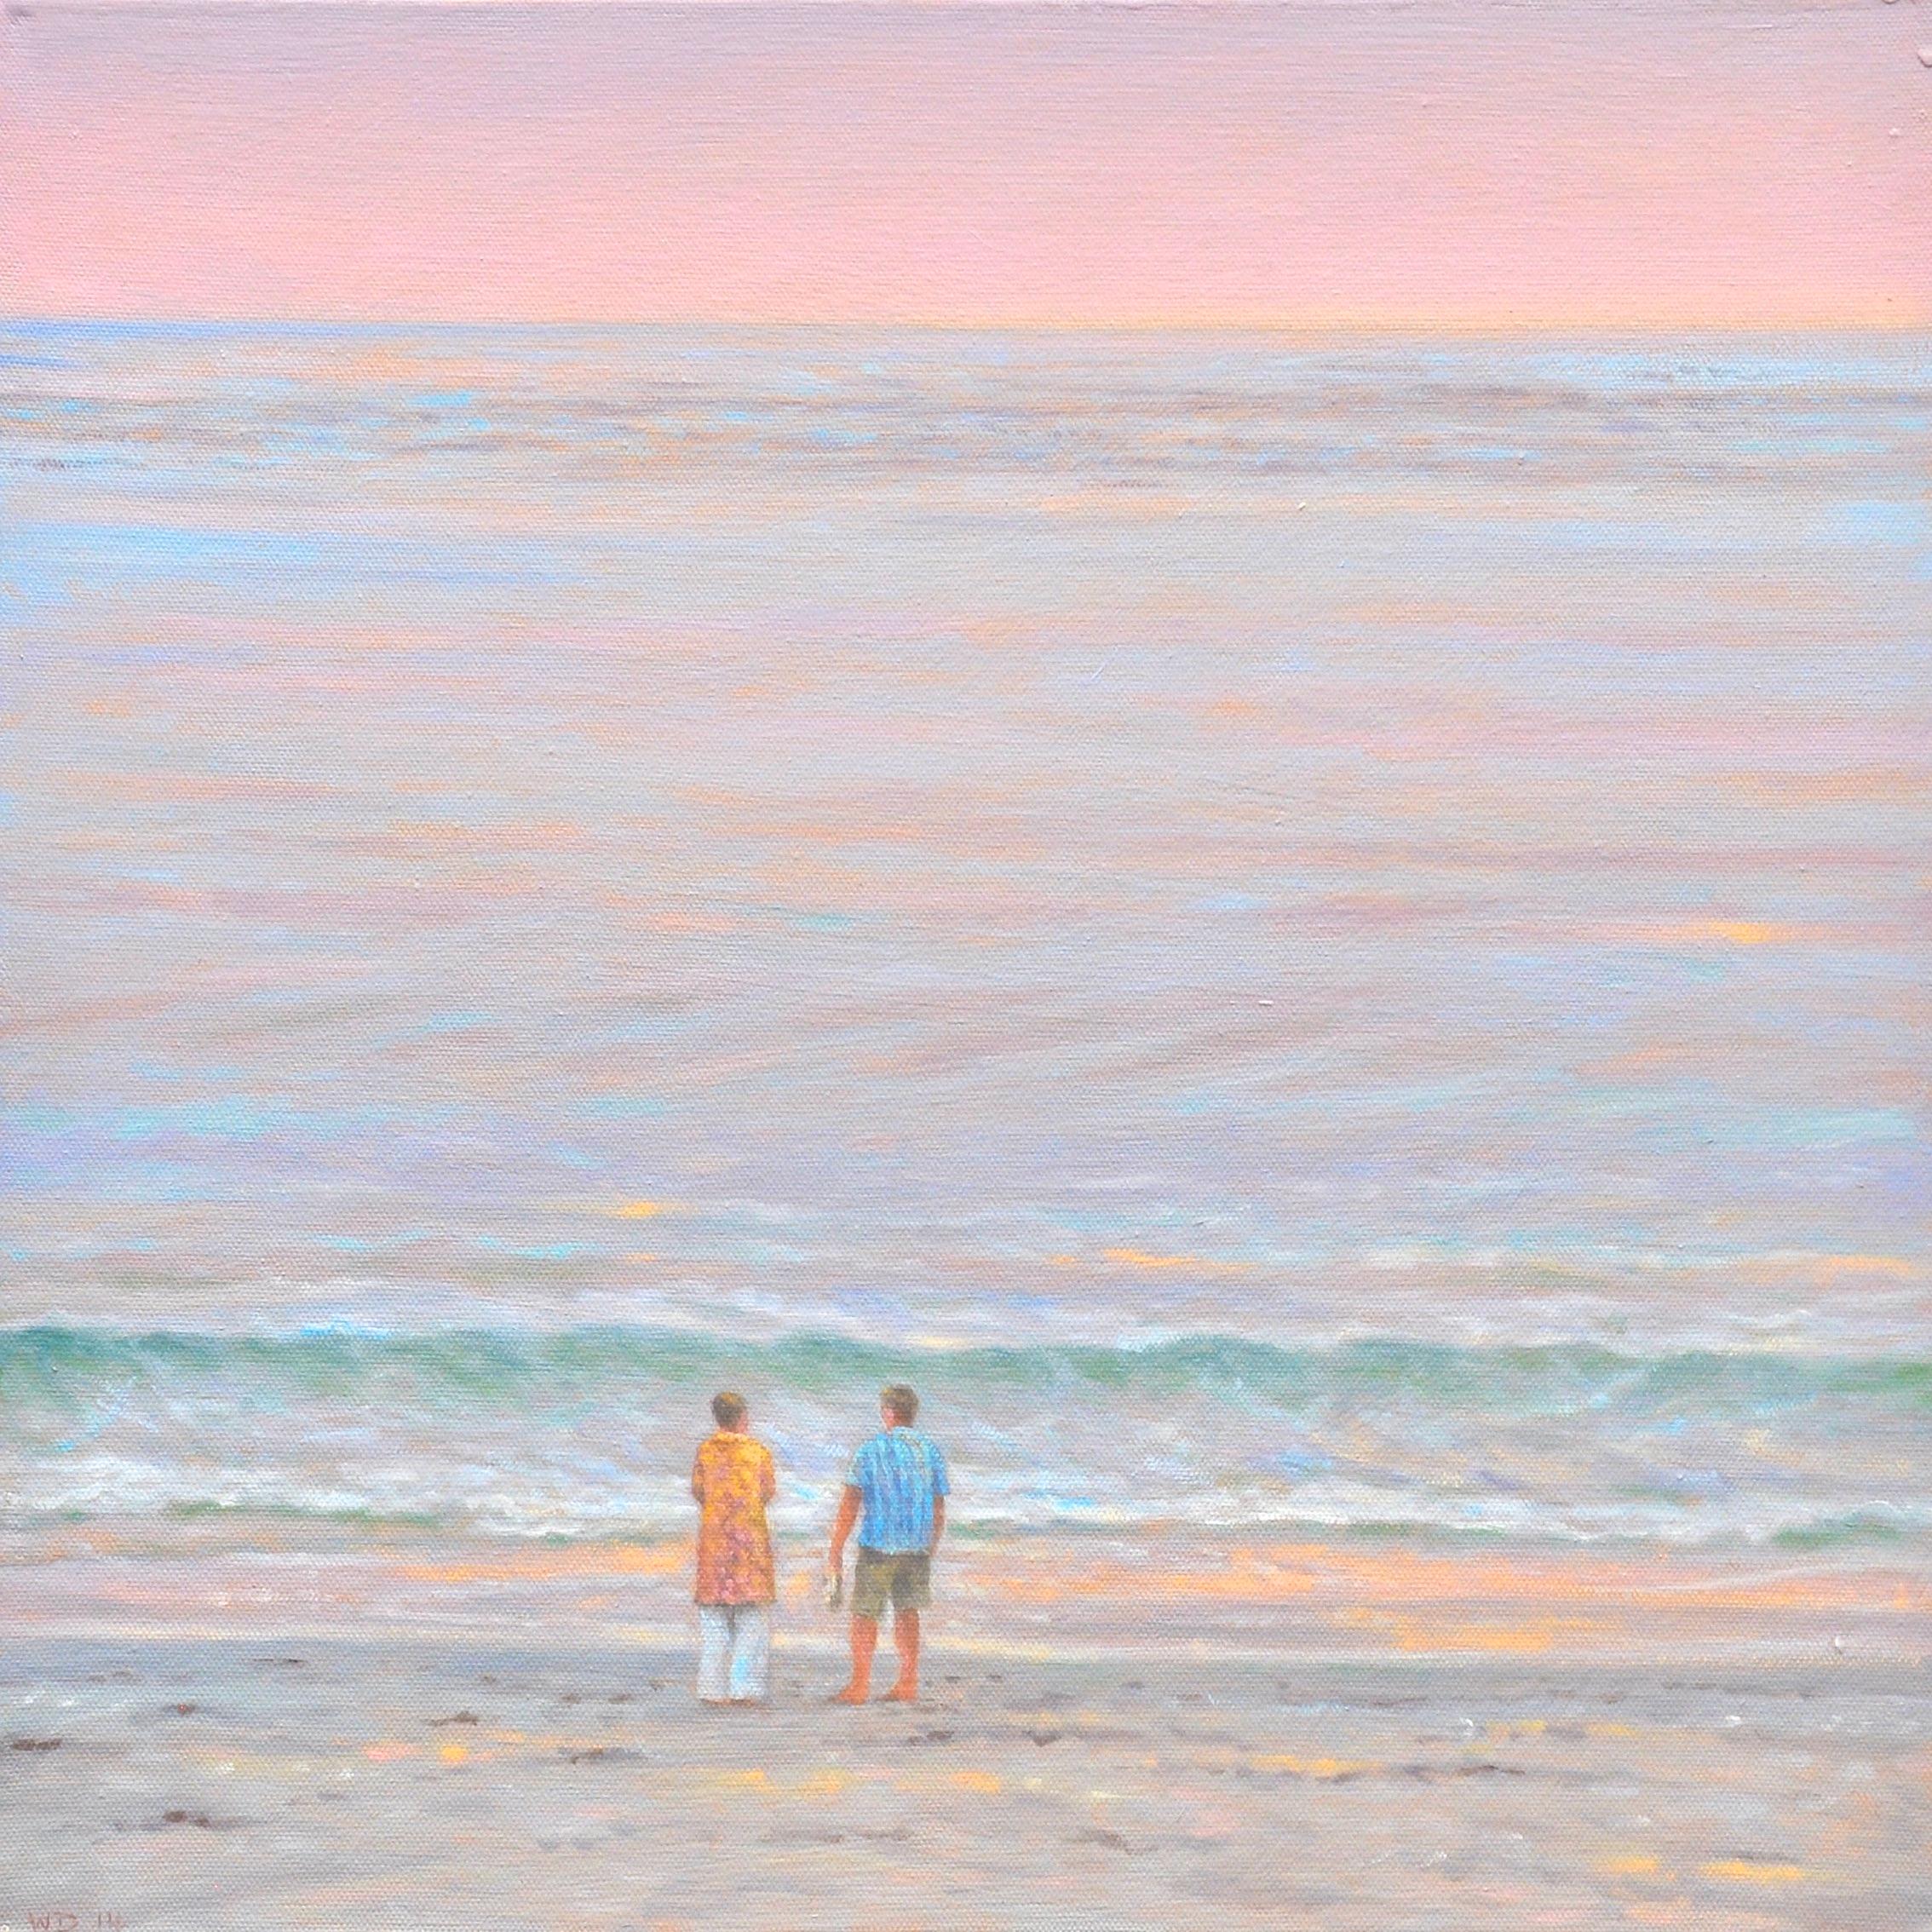 Willard Dixon Landscape Painting - Two by the Sea 